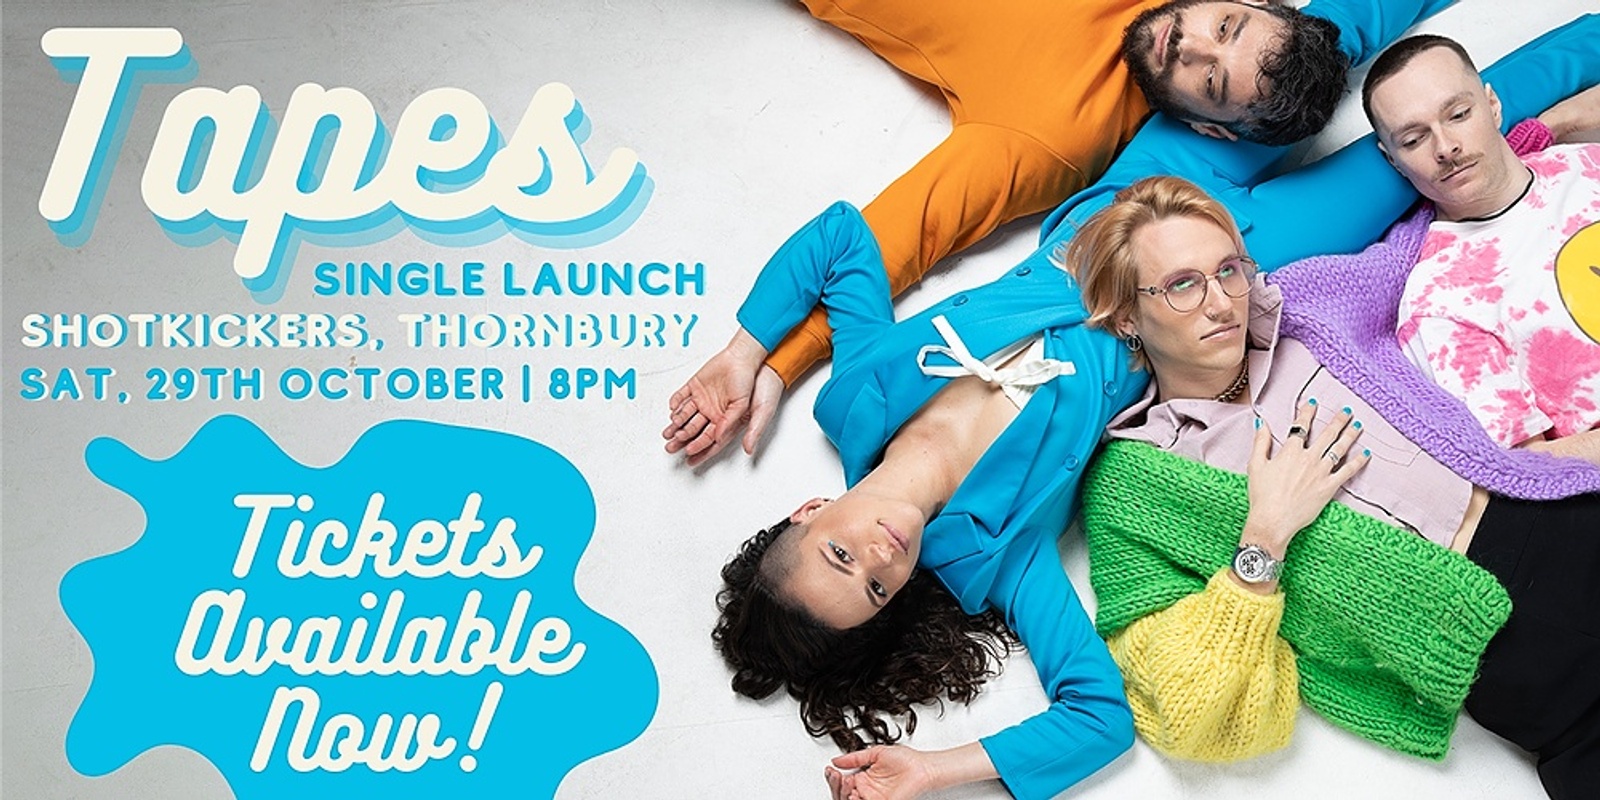 Banner image for TAPES Single Launch @ Shotkickers